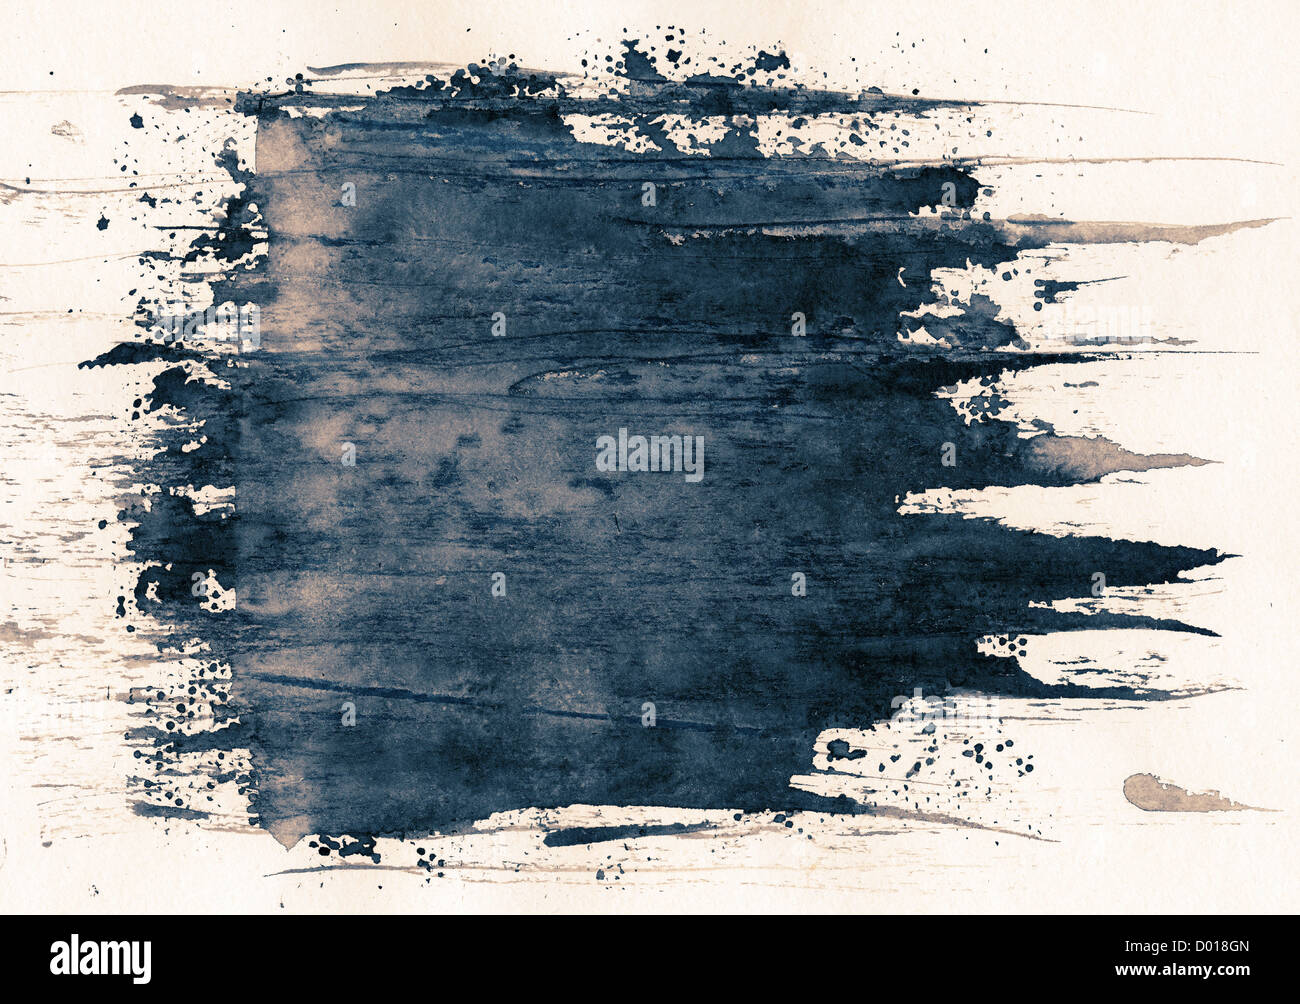 Abstract Painted Grunge Background Ink Texture Stock Photo Alamy